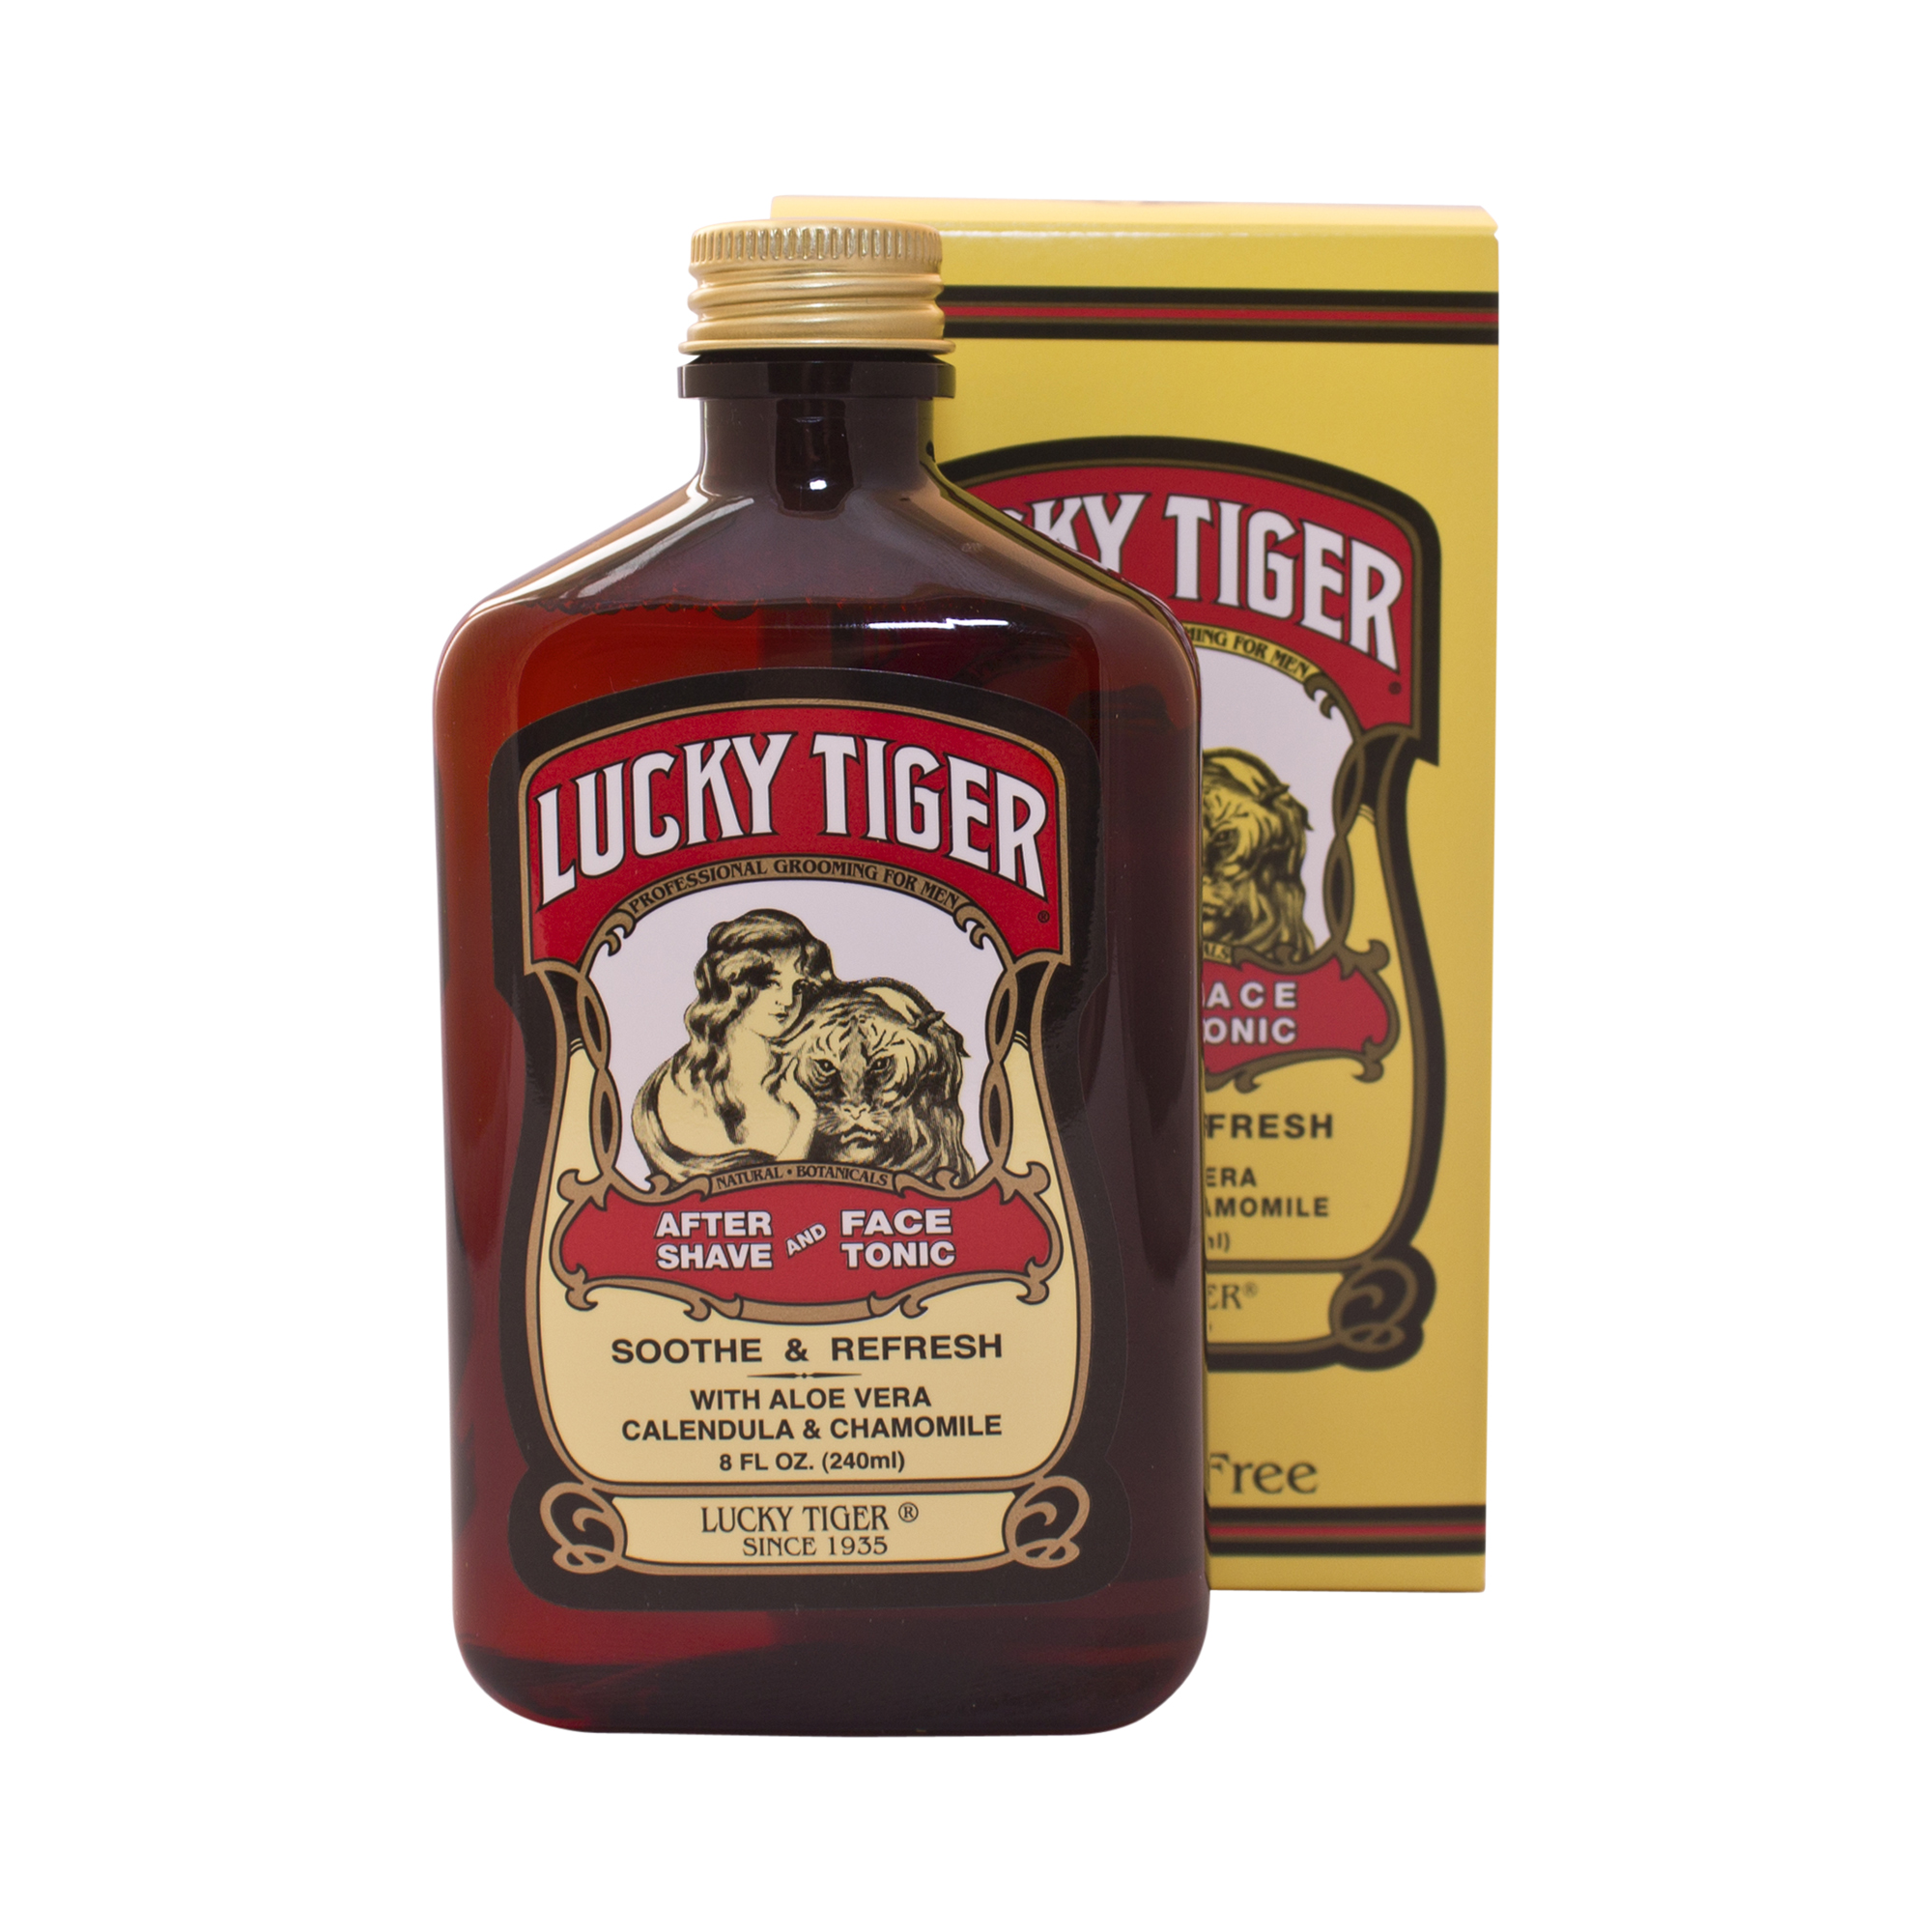 Lucky Tiger - Premium After Shave & Face Tonic